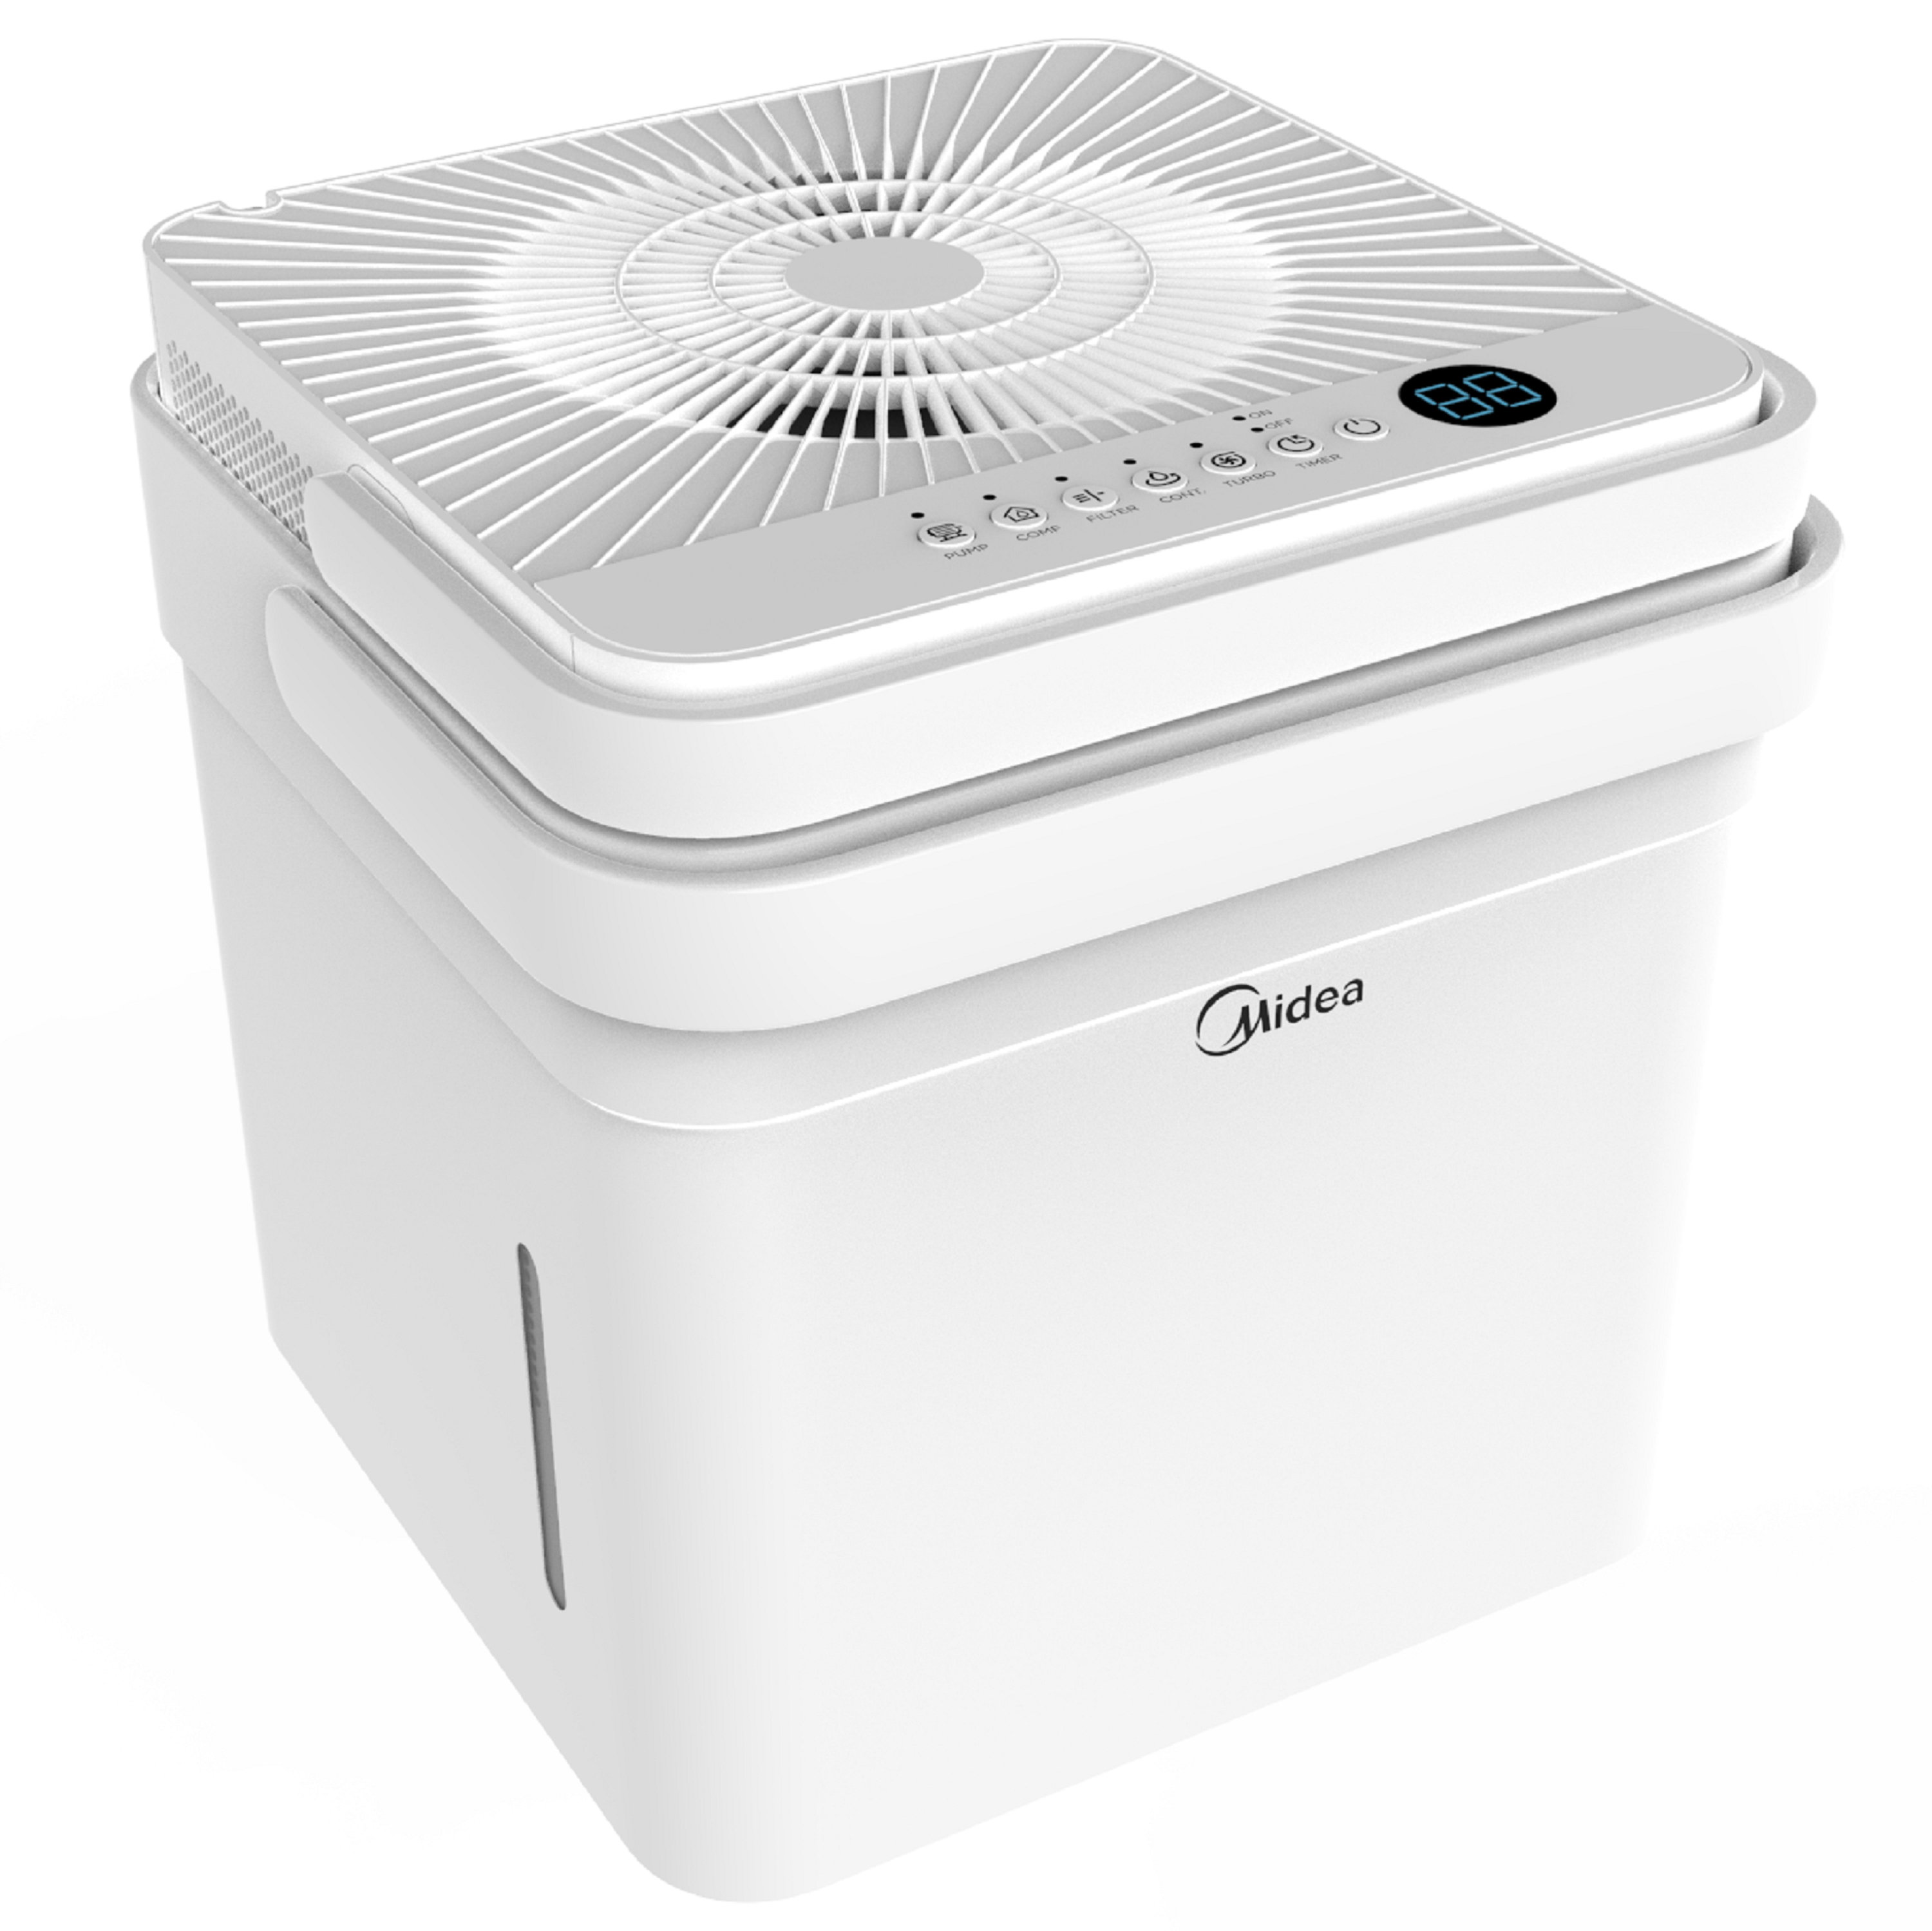 Midea Cube 20-Pint Smart Wifi Dehumidifier, Coverage up to 2,000 sq. ft., MAD20S1QWT - image 3 of 15